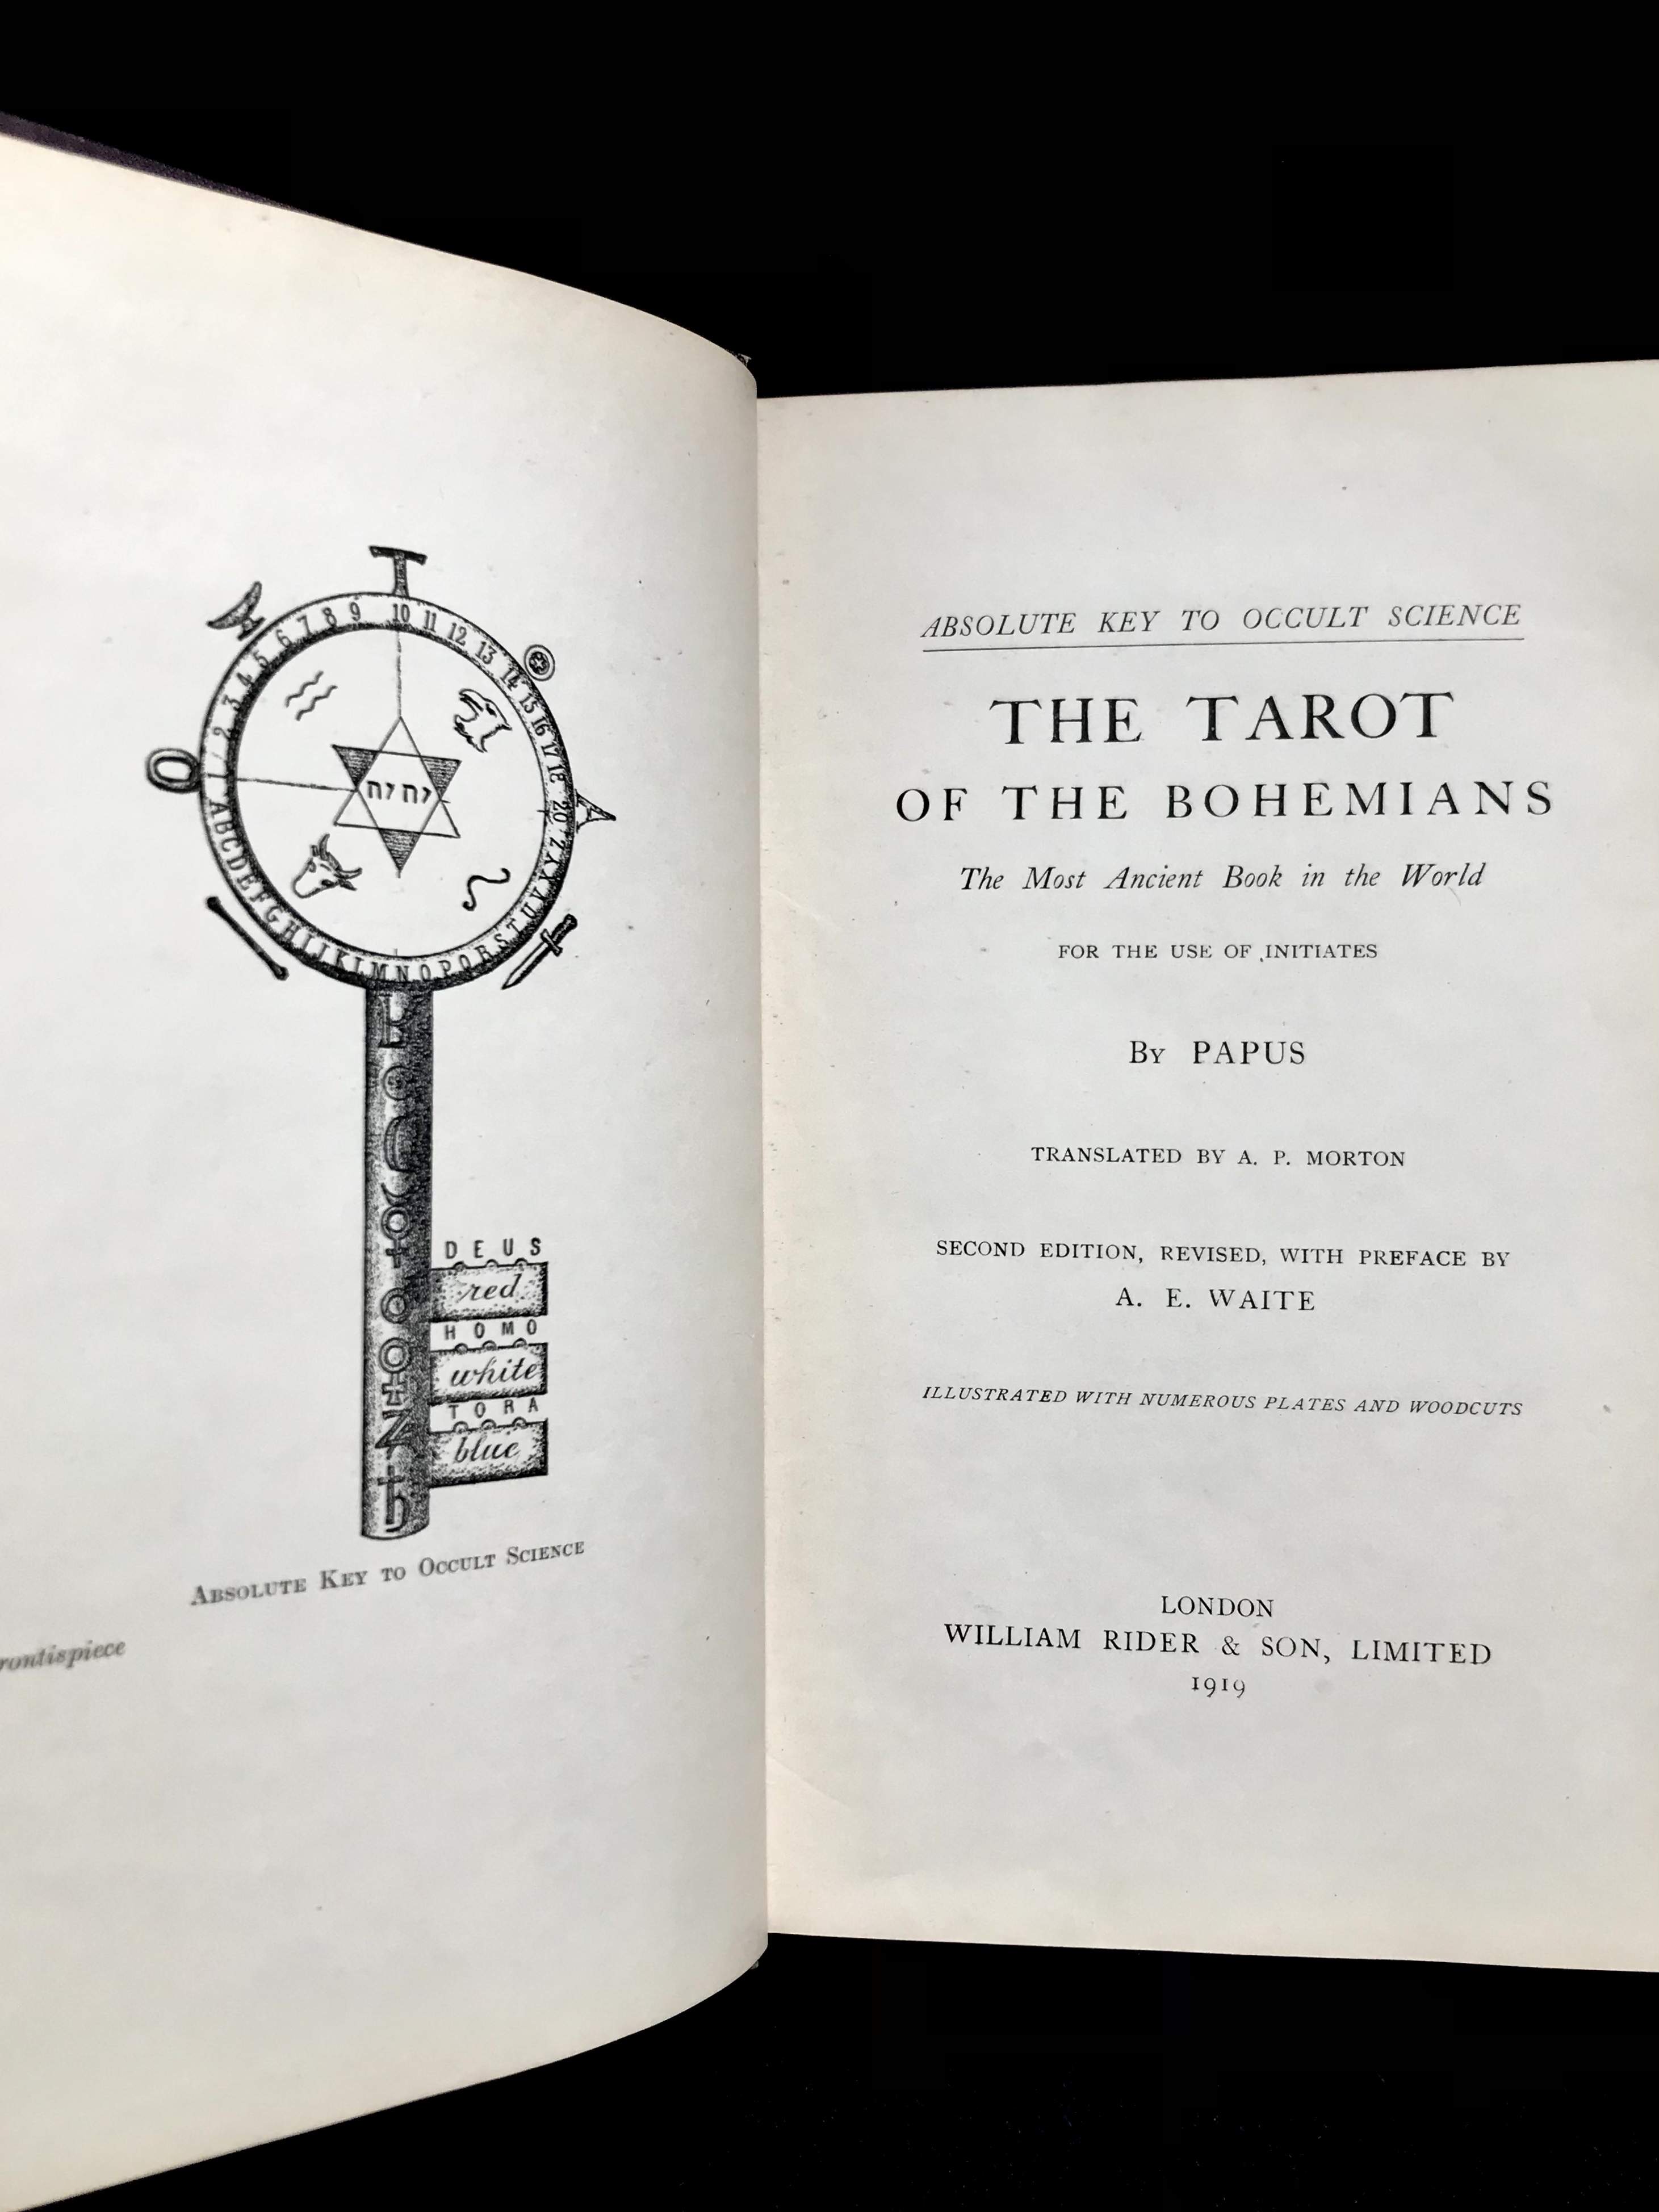 The Tarot of The Bohemians by Papus